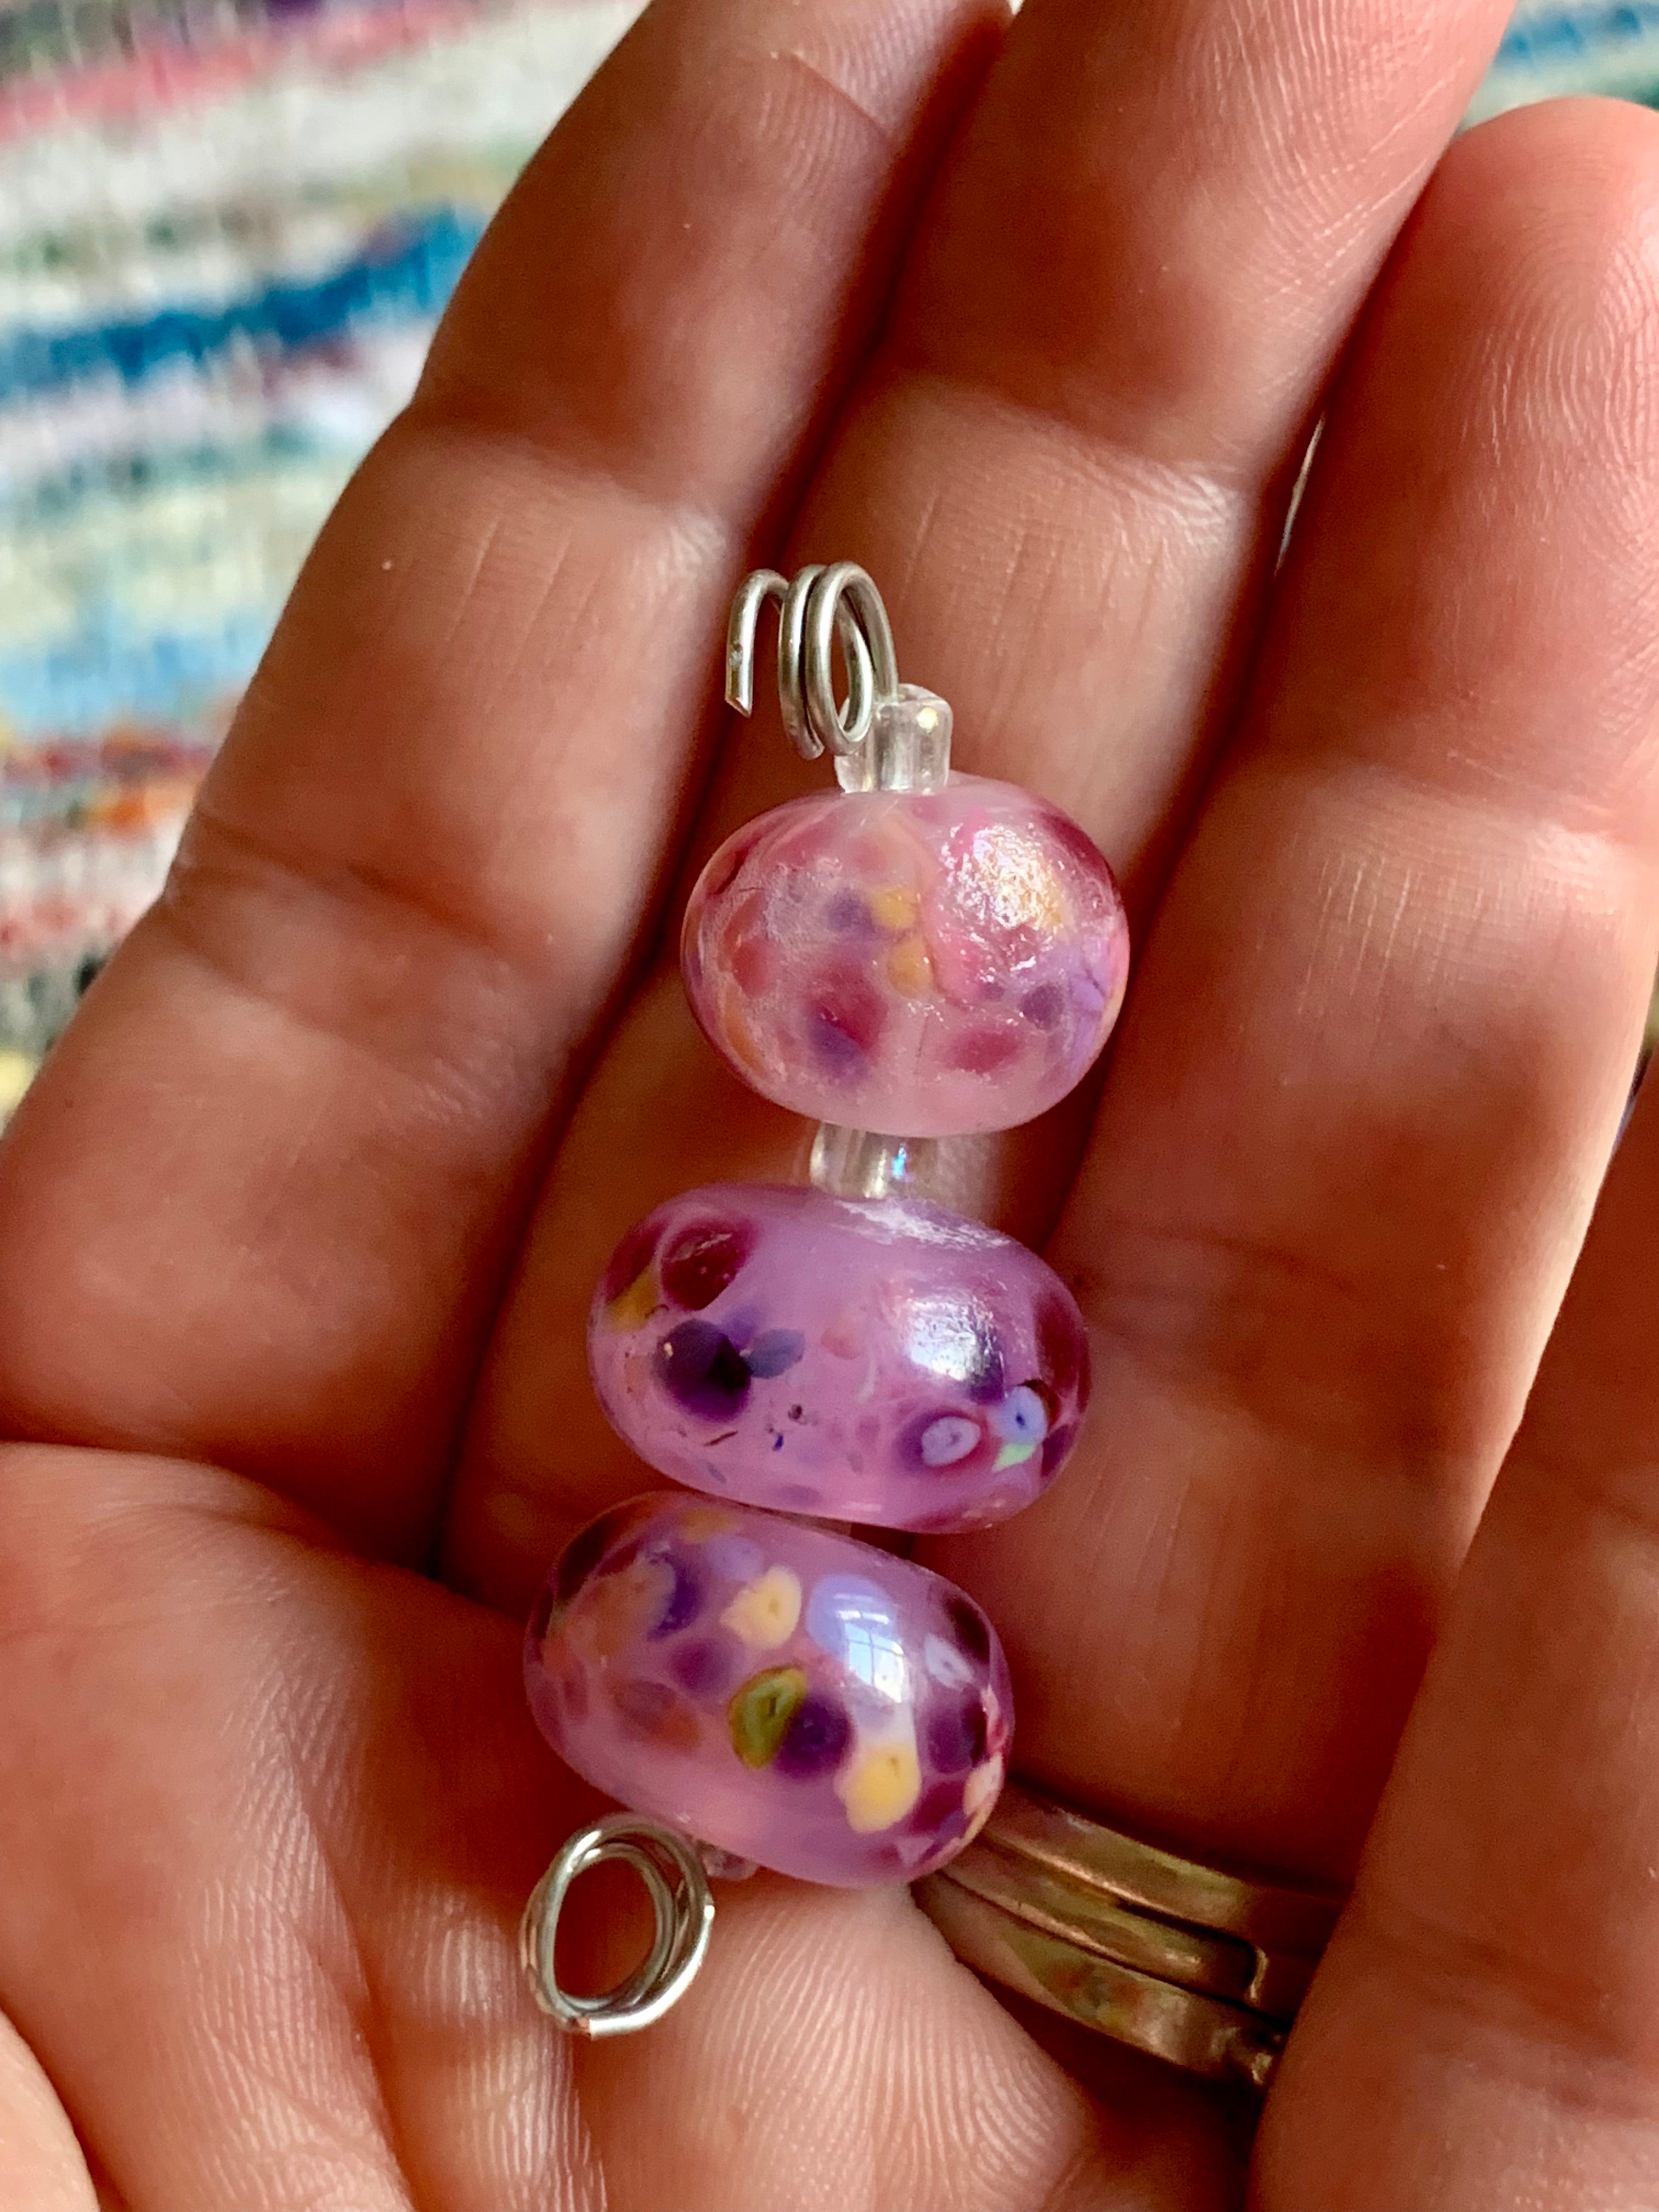 Set of 3 pretty pink lampwork beads with multicolored speckles